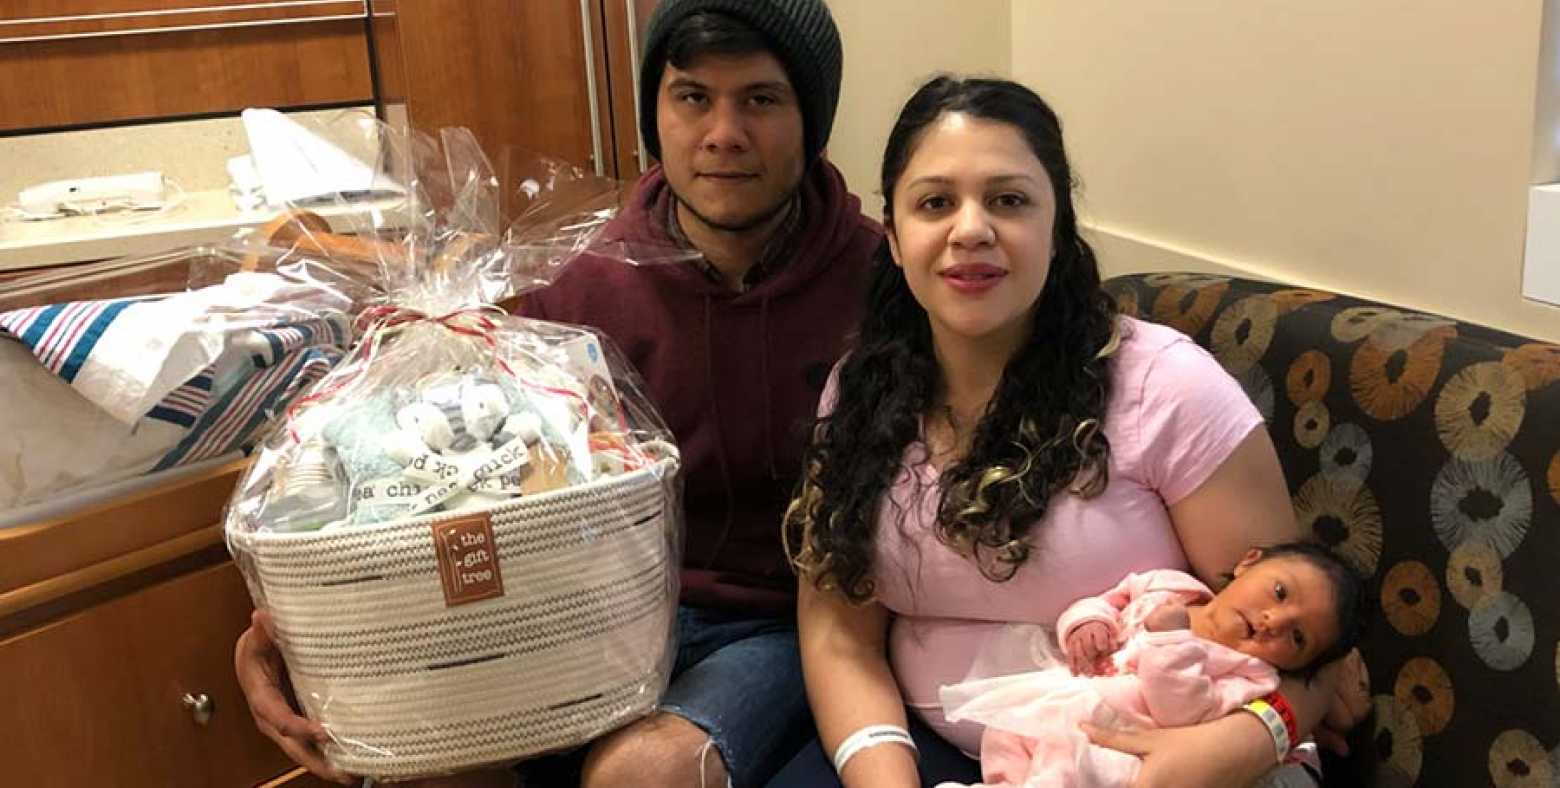 Father, Christian Meraz, Mother, Mayra Silva, and first baby of the new year, Leah Alessandra Meraz, with a gift basket donated by Tahoe Forest Health System Foundation’s gift shop, The Gift Tree 